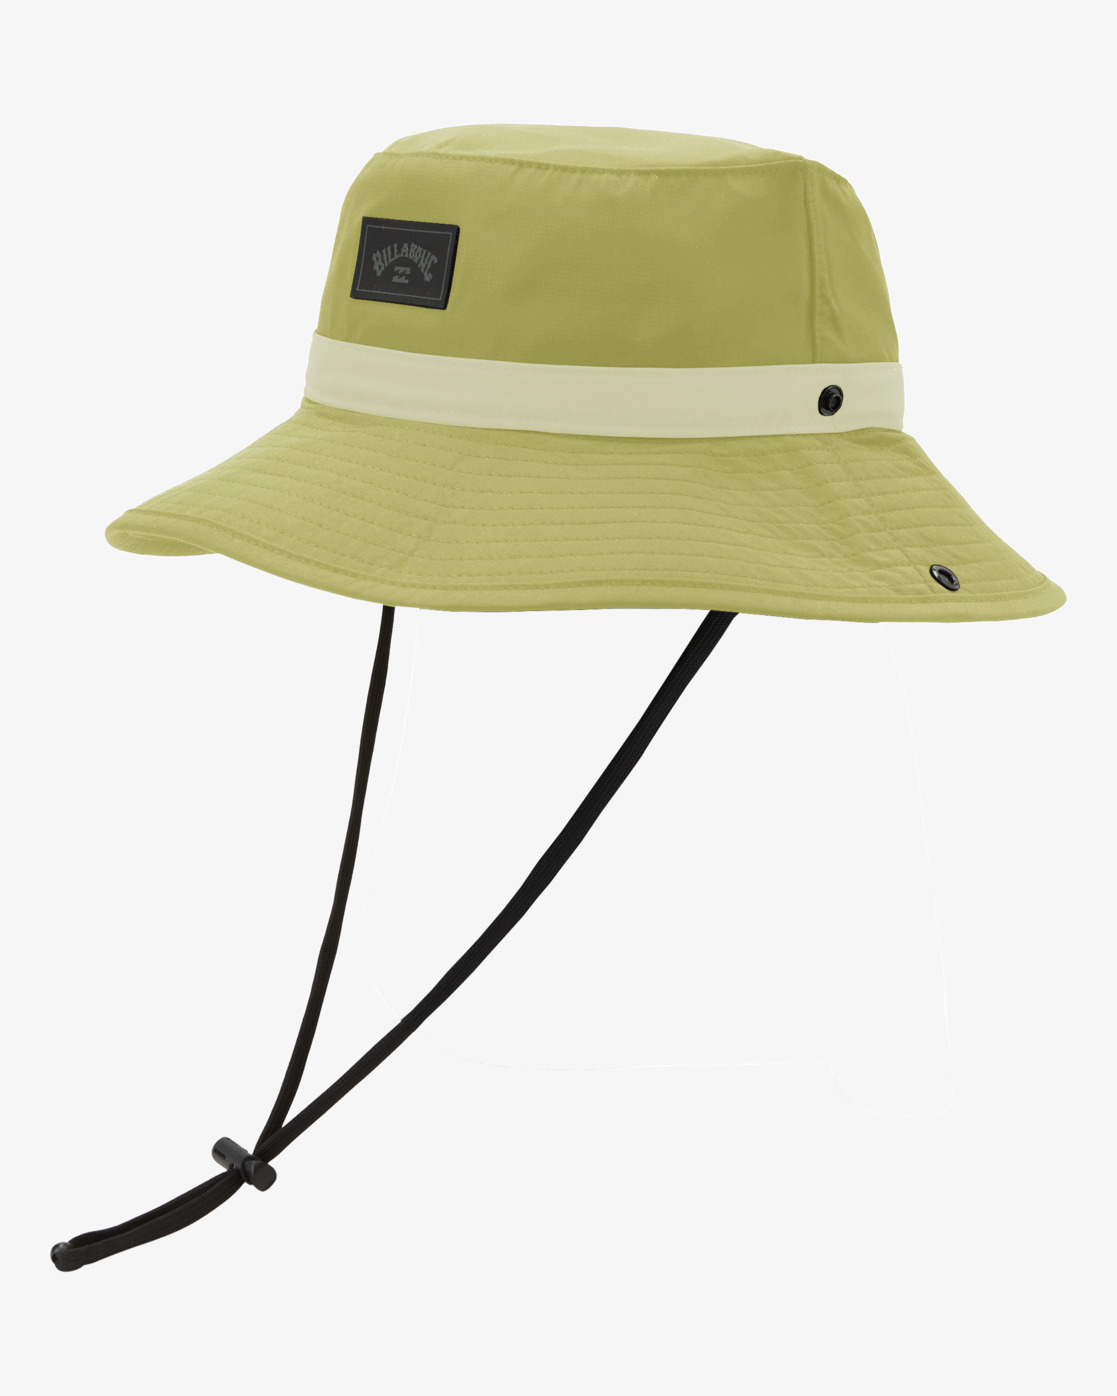 Get Bestsellers A/Div Big John Safari Hat at a discounted price on ...